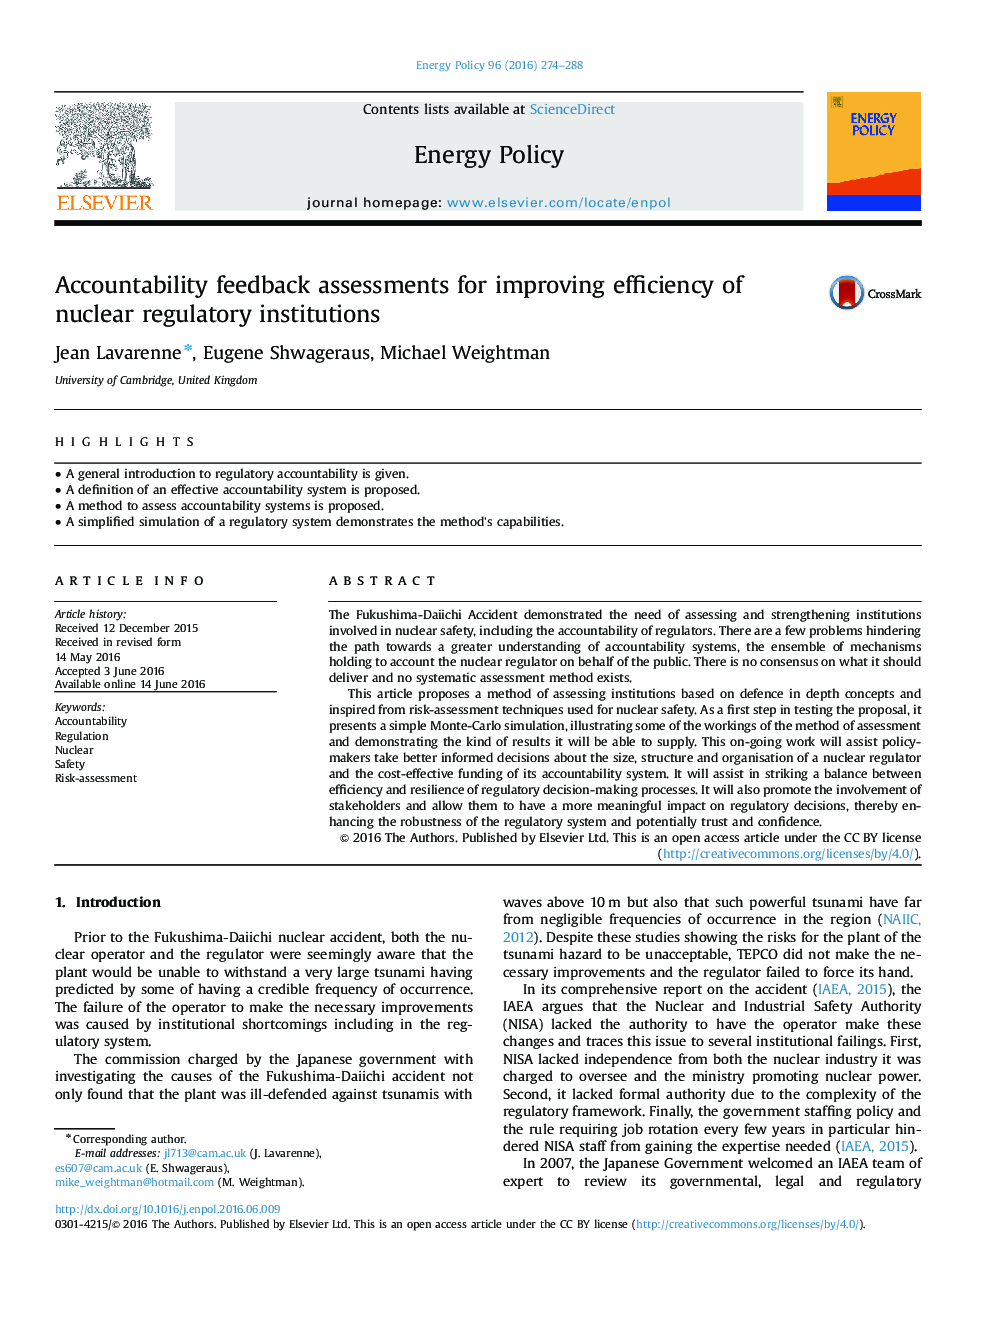 Accountability feedback assessments for improving efficiency of nuclear regulatory institutions